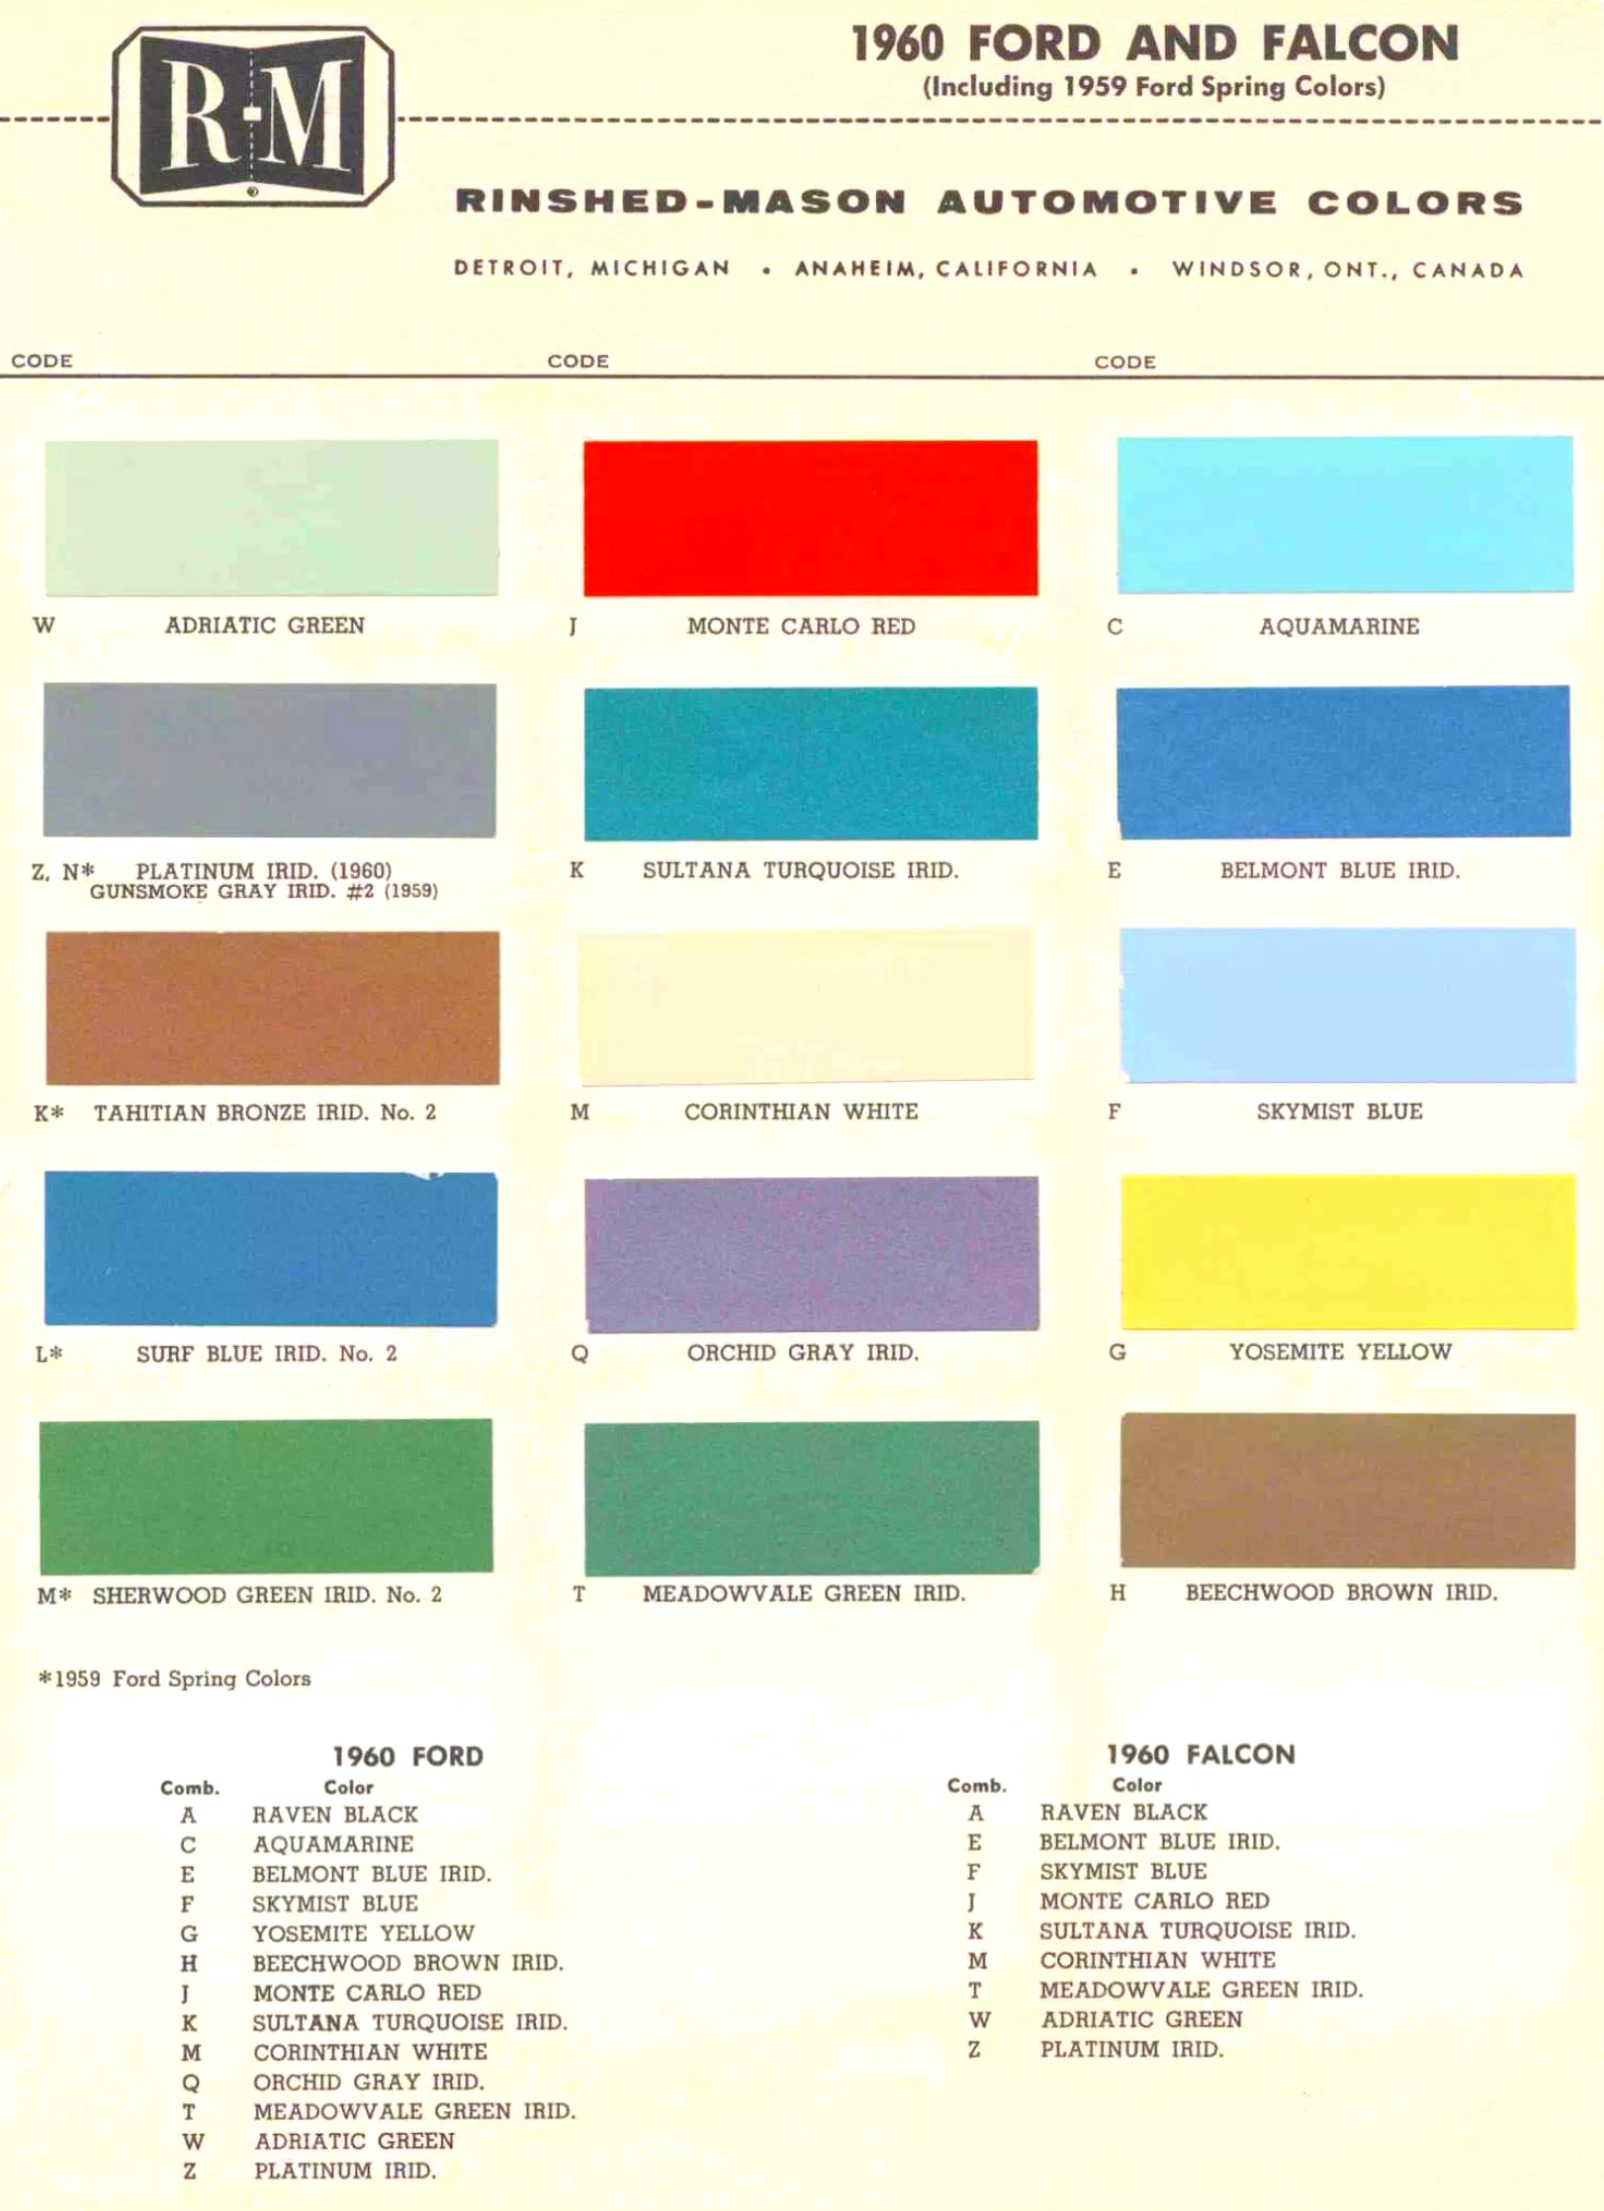 Color examples, Ordering Codes, OEM Paint Code, Color Swatches, and Color Names for the Ford Motor Company in 1960